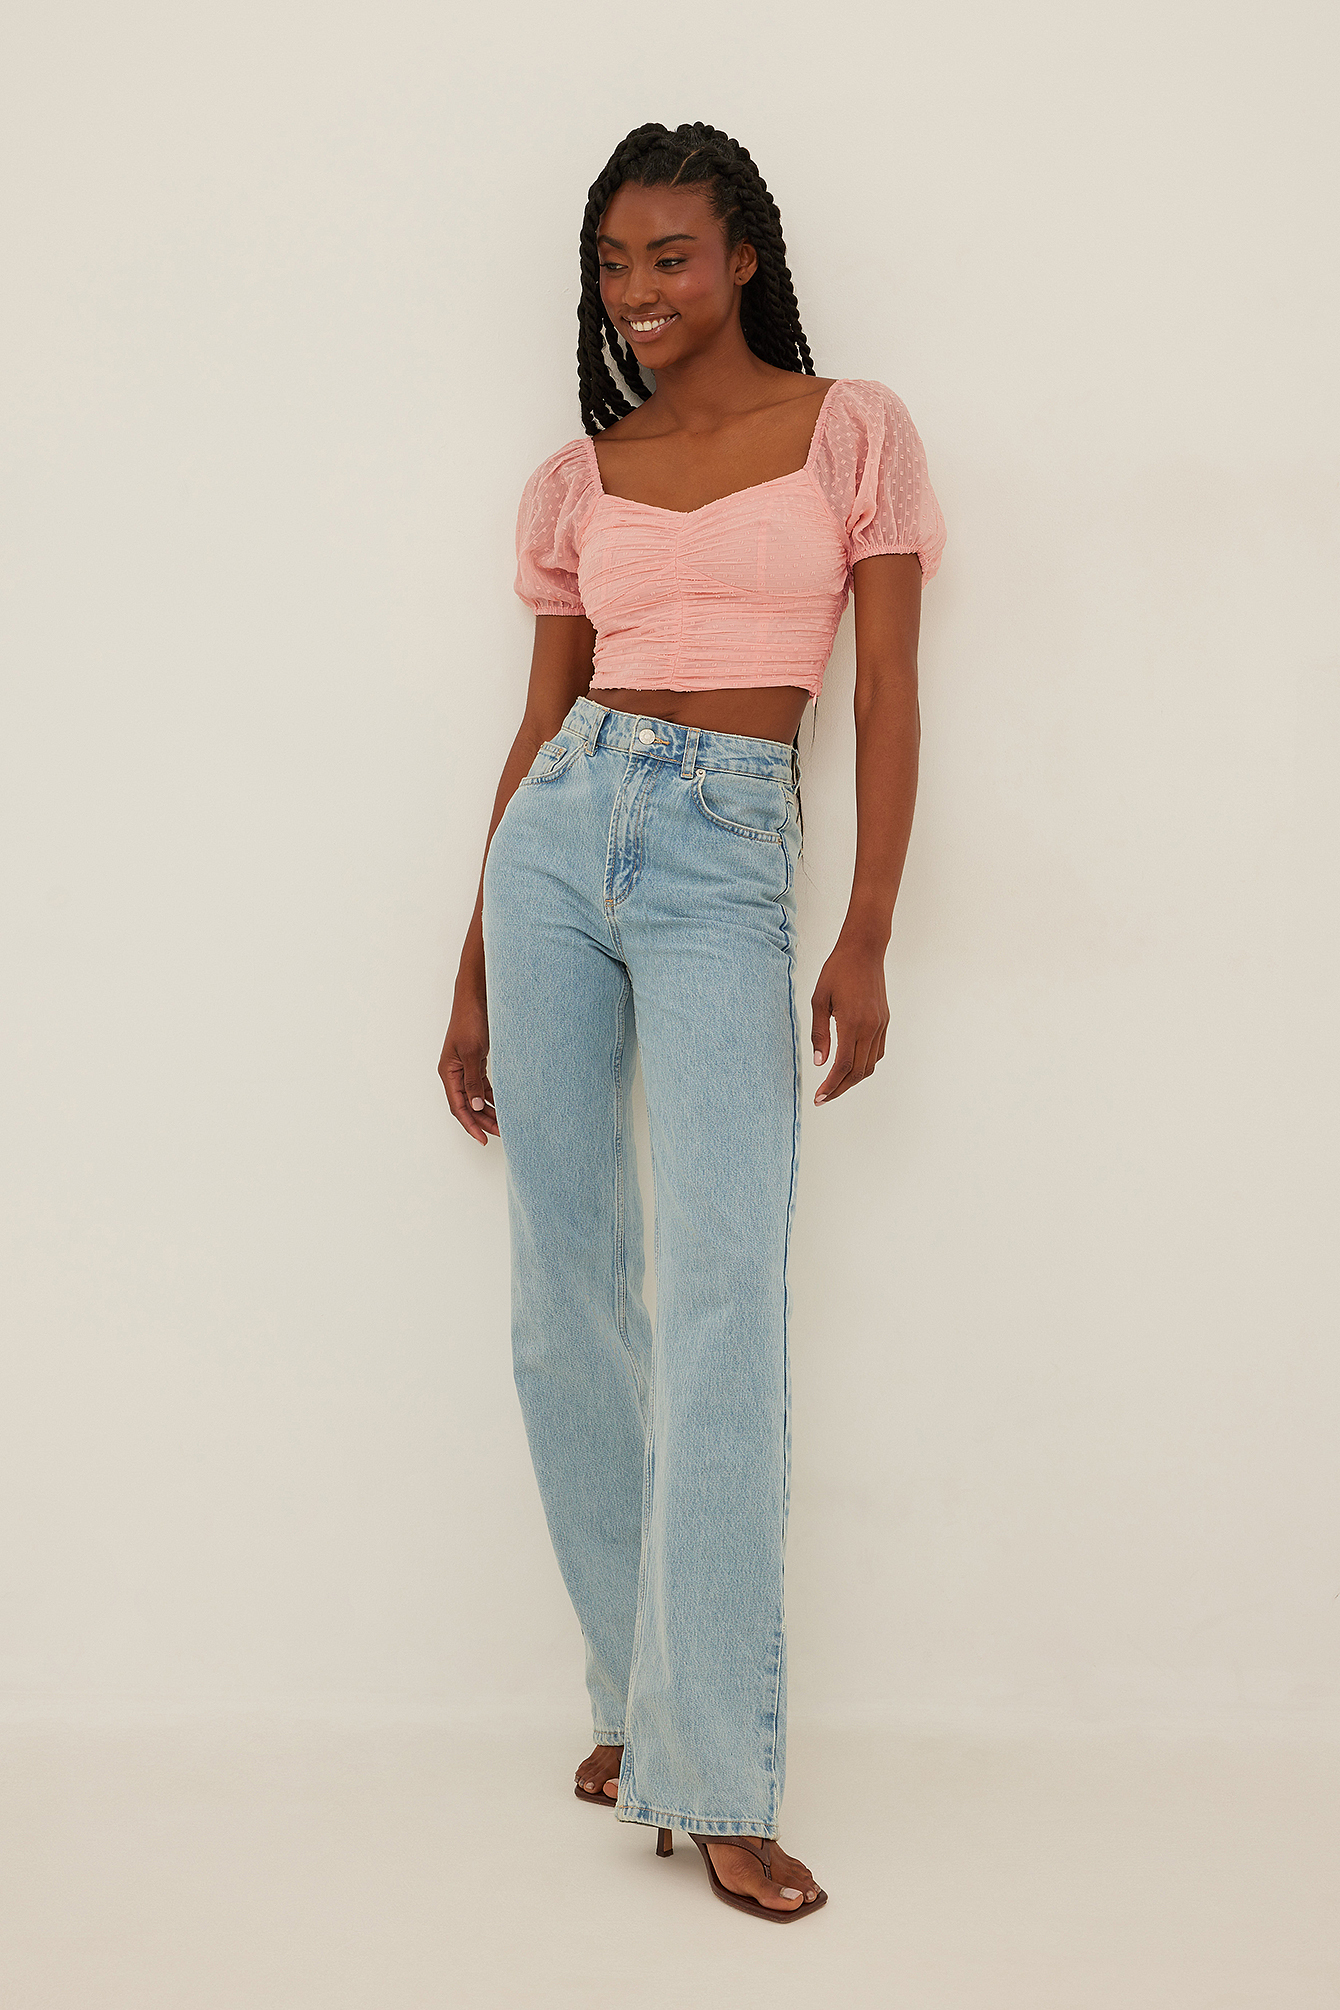 Short Sleeve Cropped Dobby Top Outfit.